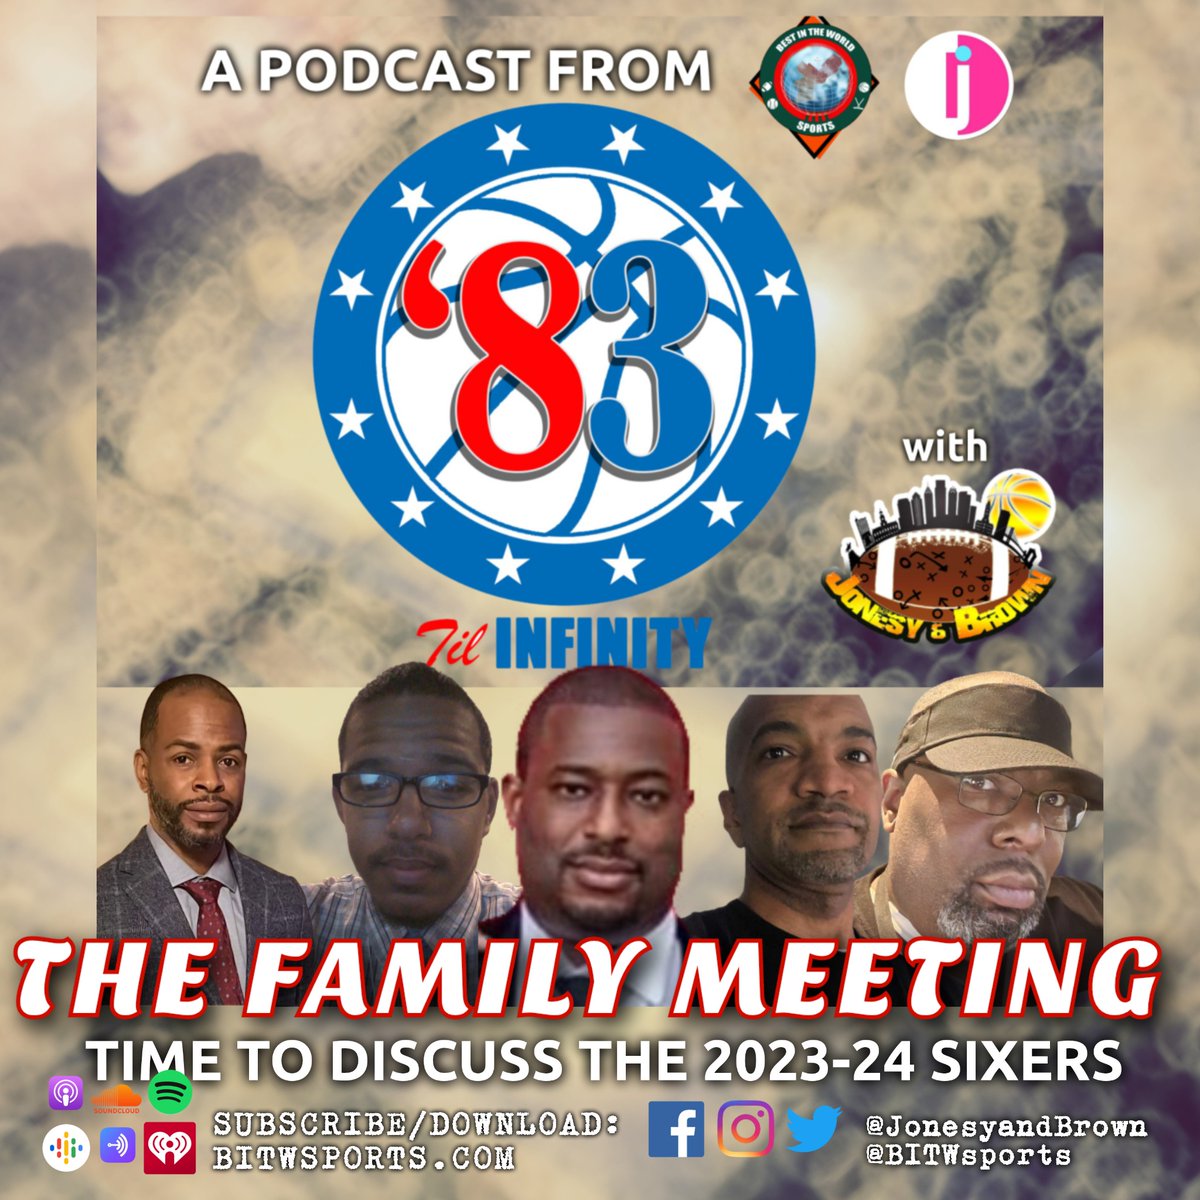 New Podcast Available Now Subscribe/Download: BITWsports.com @JonesyandBrown Ep. 75: #83tilInfinity - The #Sixers Family Meeting Discussing how the 76ers Move Forward this offseason Hosts: @Jonesy_LJR, @JLBfromDVM Guests: @Jovan10, @TheBSLine, @AdioBRoyster